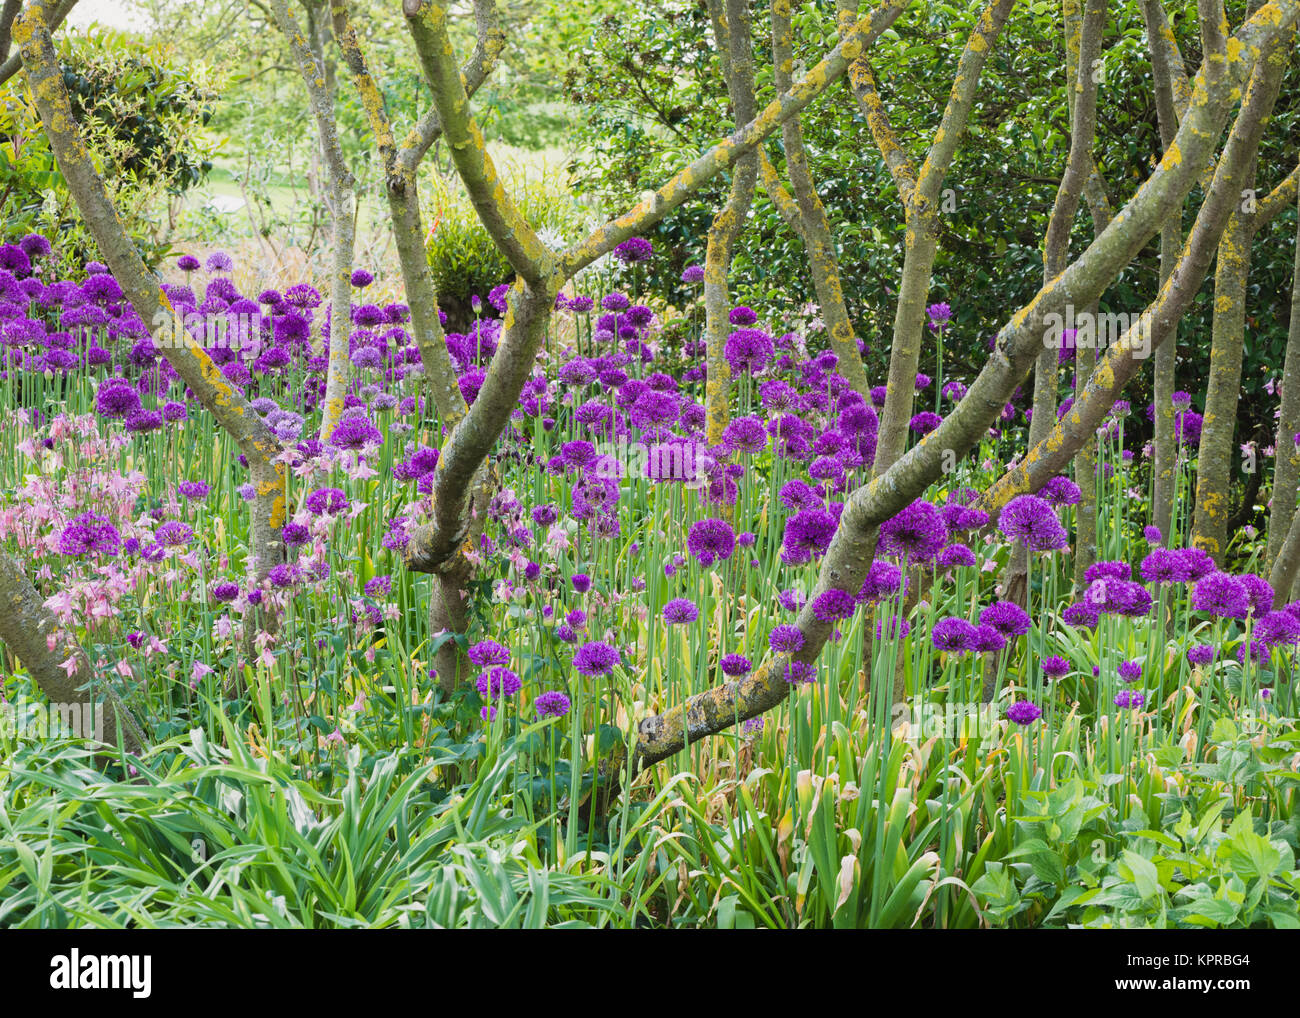 A bed to Purple Sensation allium flowers under tree stems in a Spring English Country Garden Stock Photo